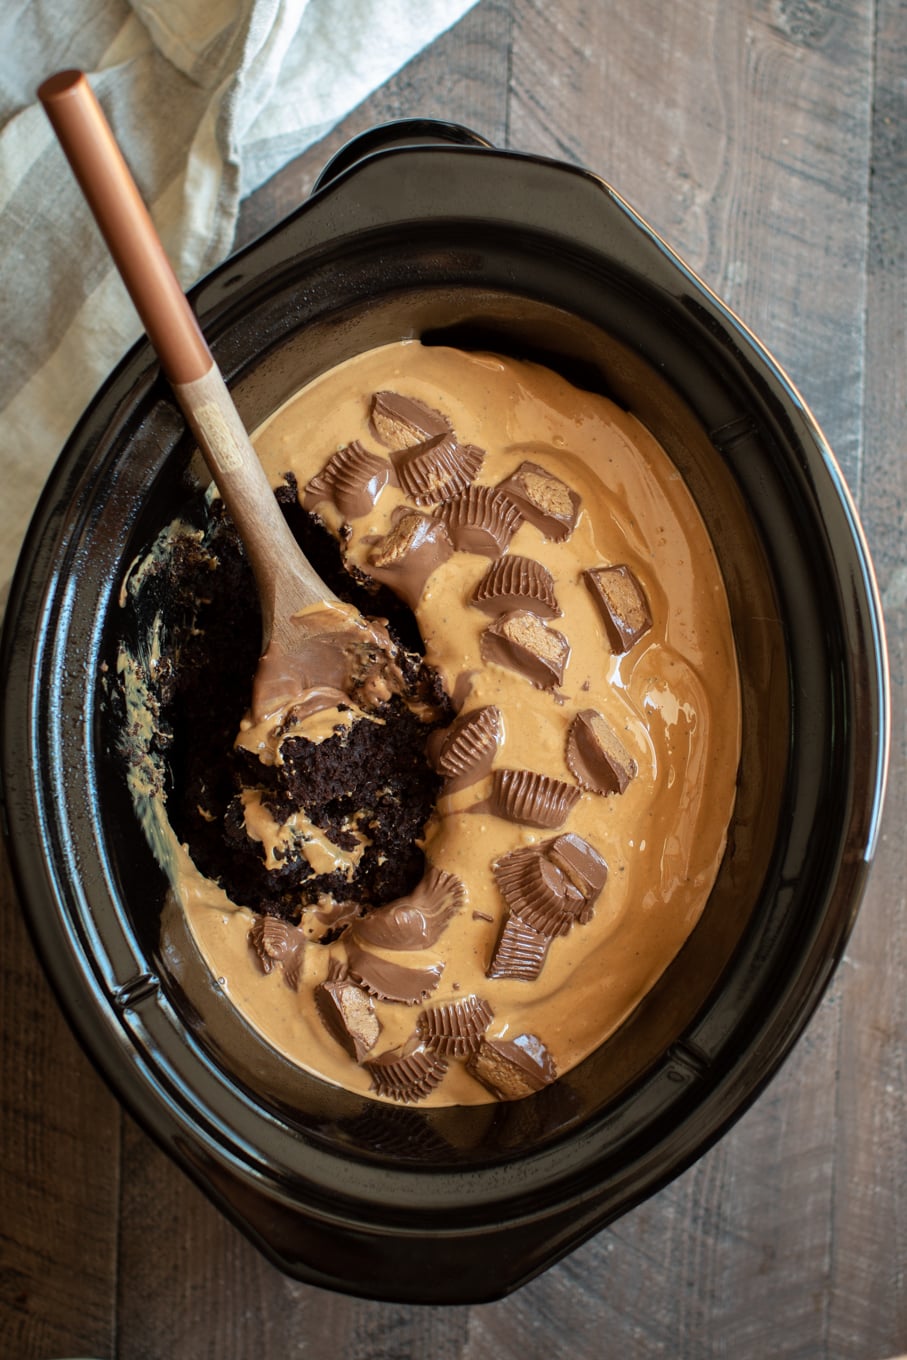 chocolate cake in slow cooker with peanut butter icing, wooden spoon in it.